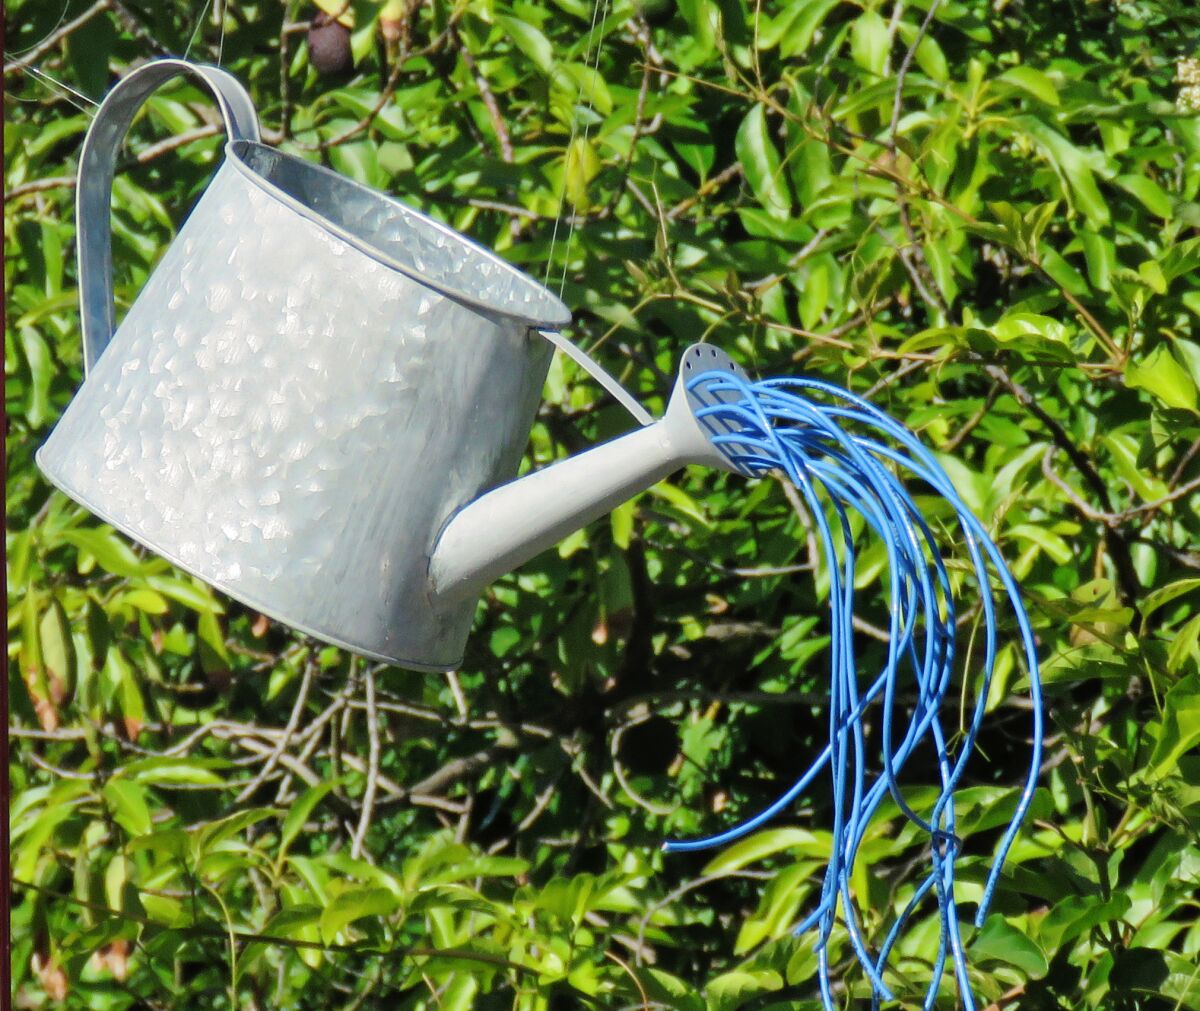 Bert and Cynthia Rhine's garden art centerpiece has a watering can with blue electrical wire simulating water.